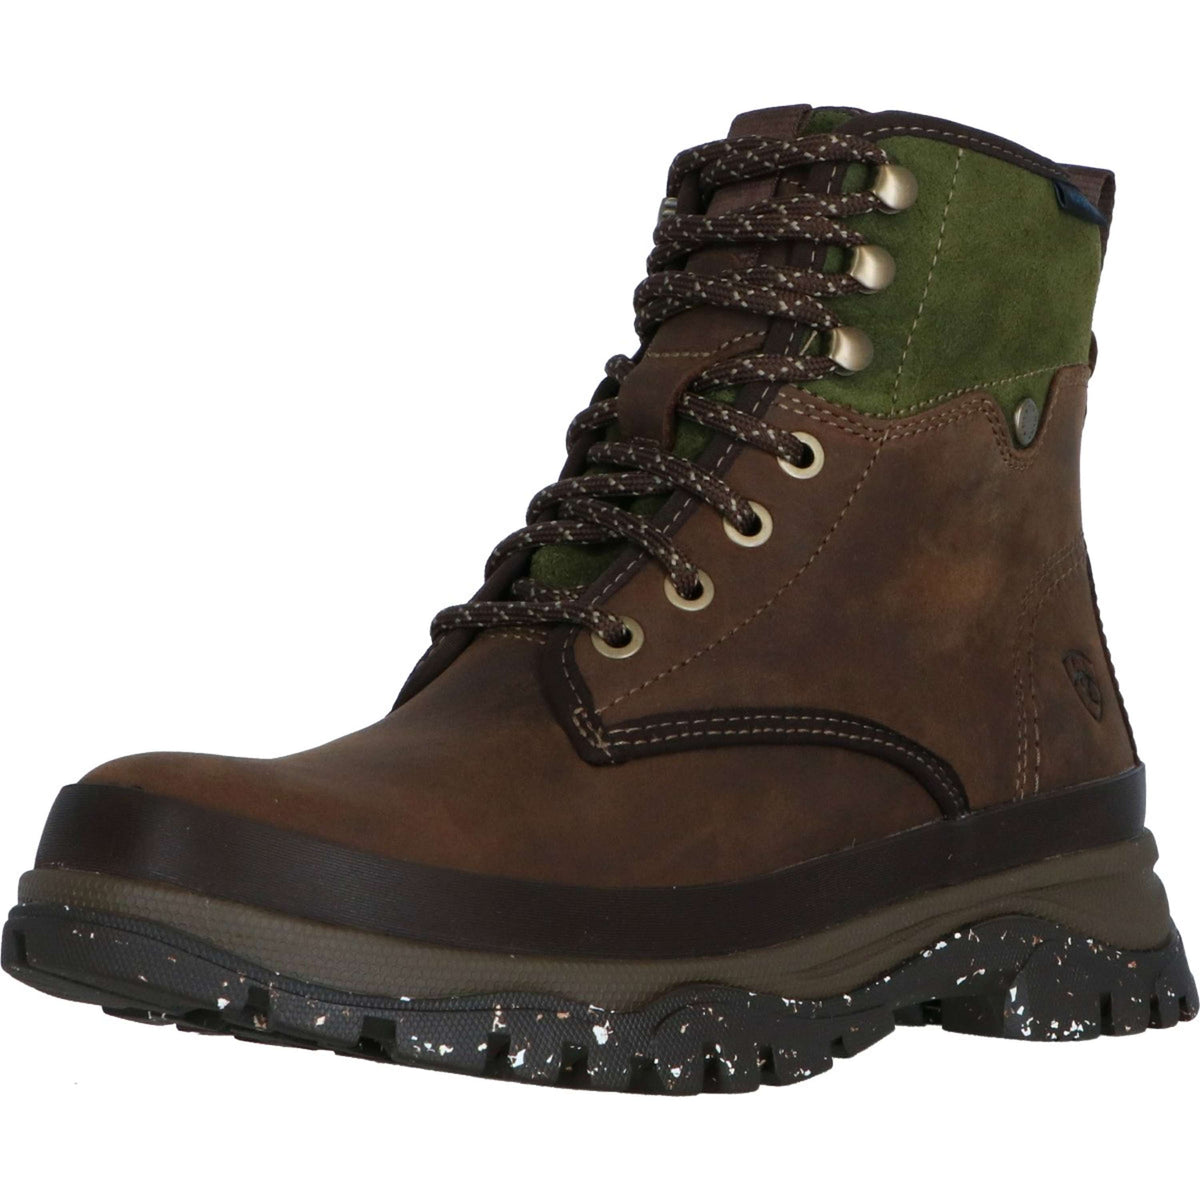 Ariat Outdoorstiefel Moresby H2O Oily Braun/Olive